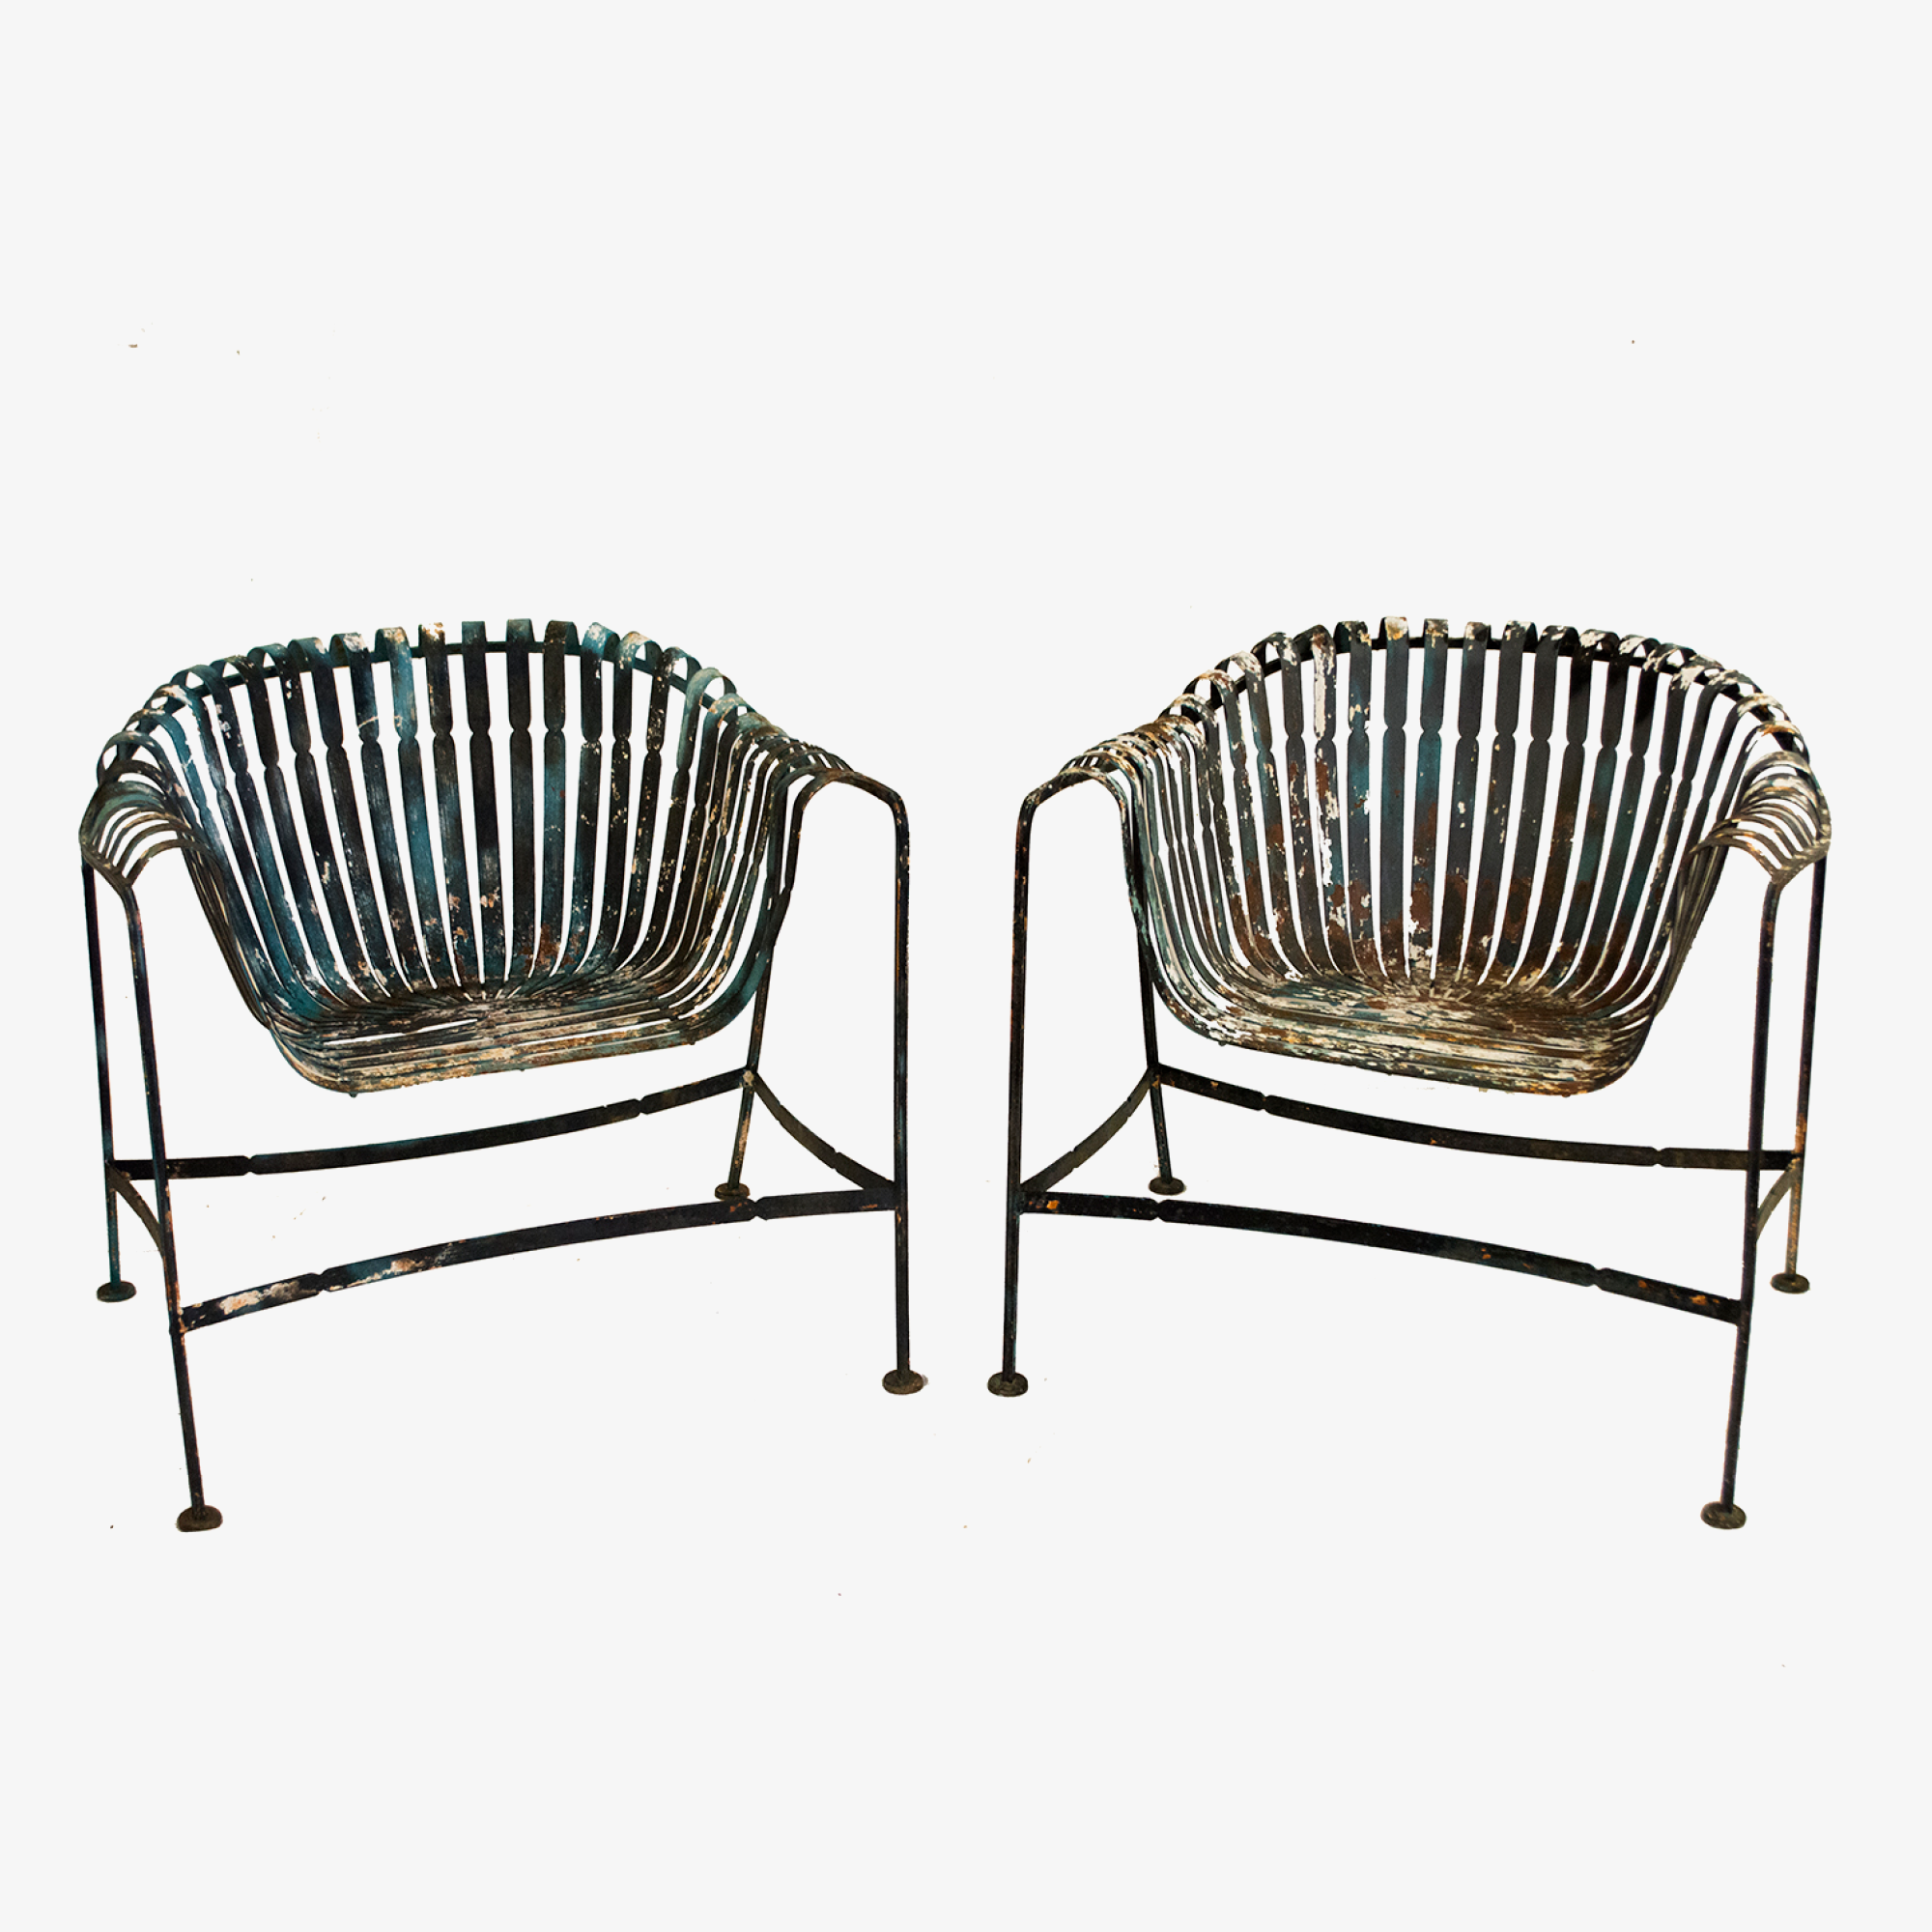 French Garden Chairs by Woodard 1.png